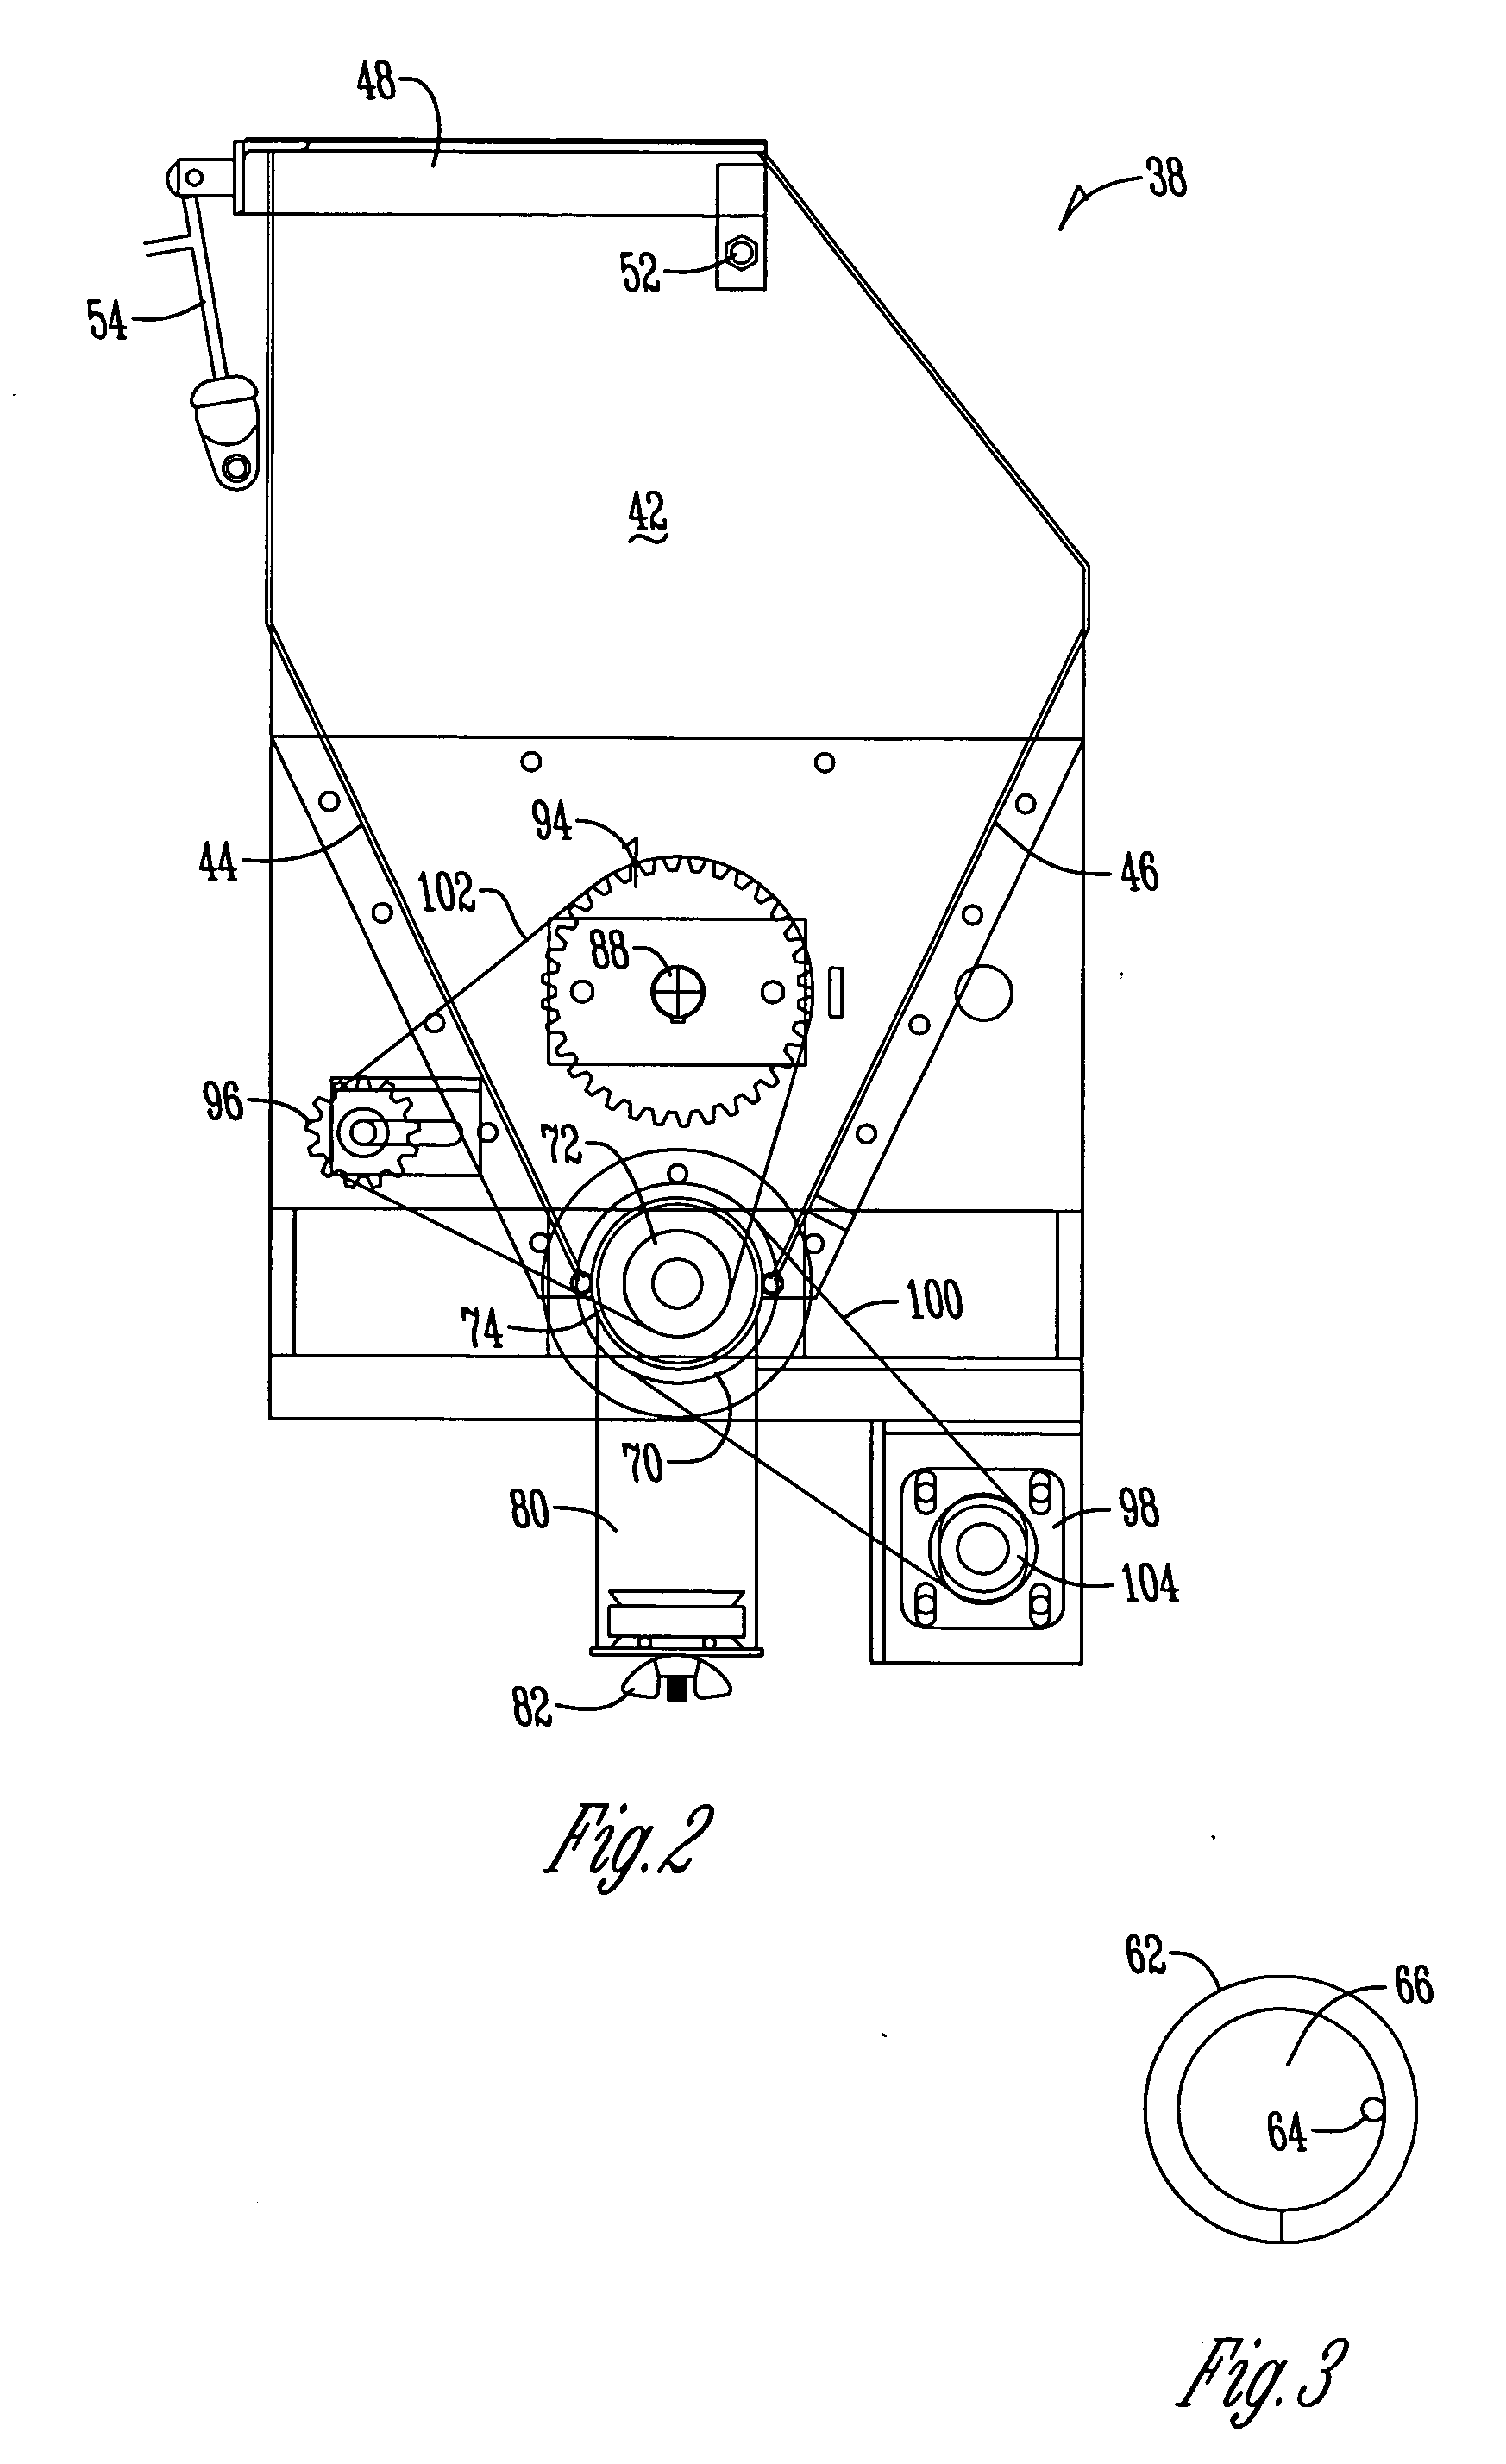 Apparatus and method for adding pigmentation to concrete mix